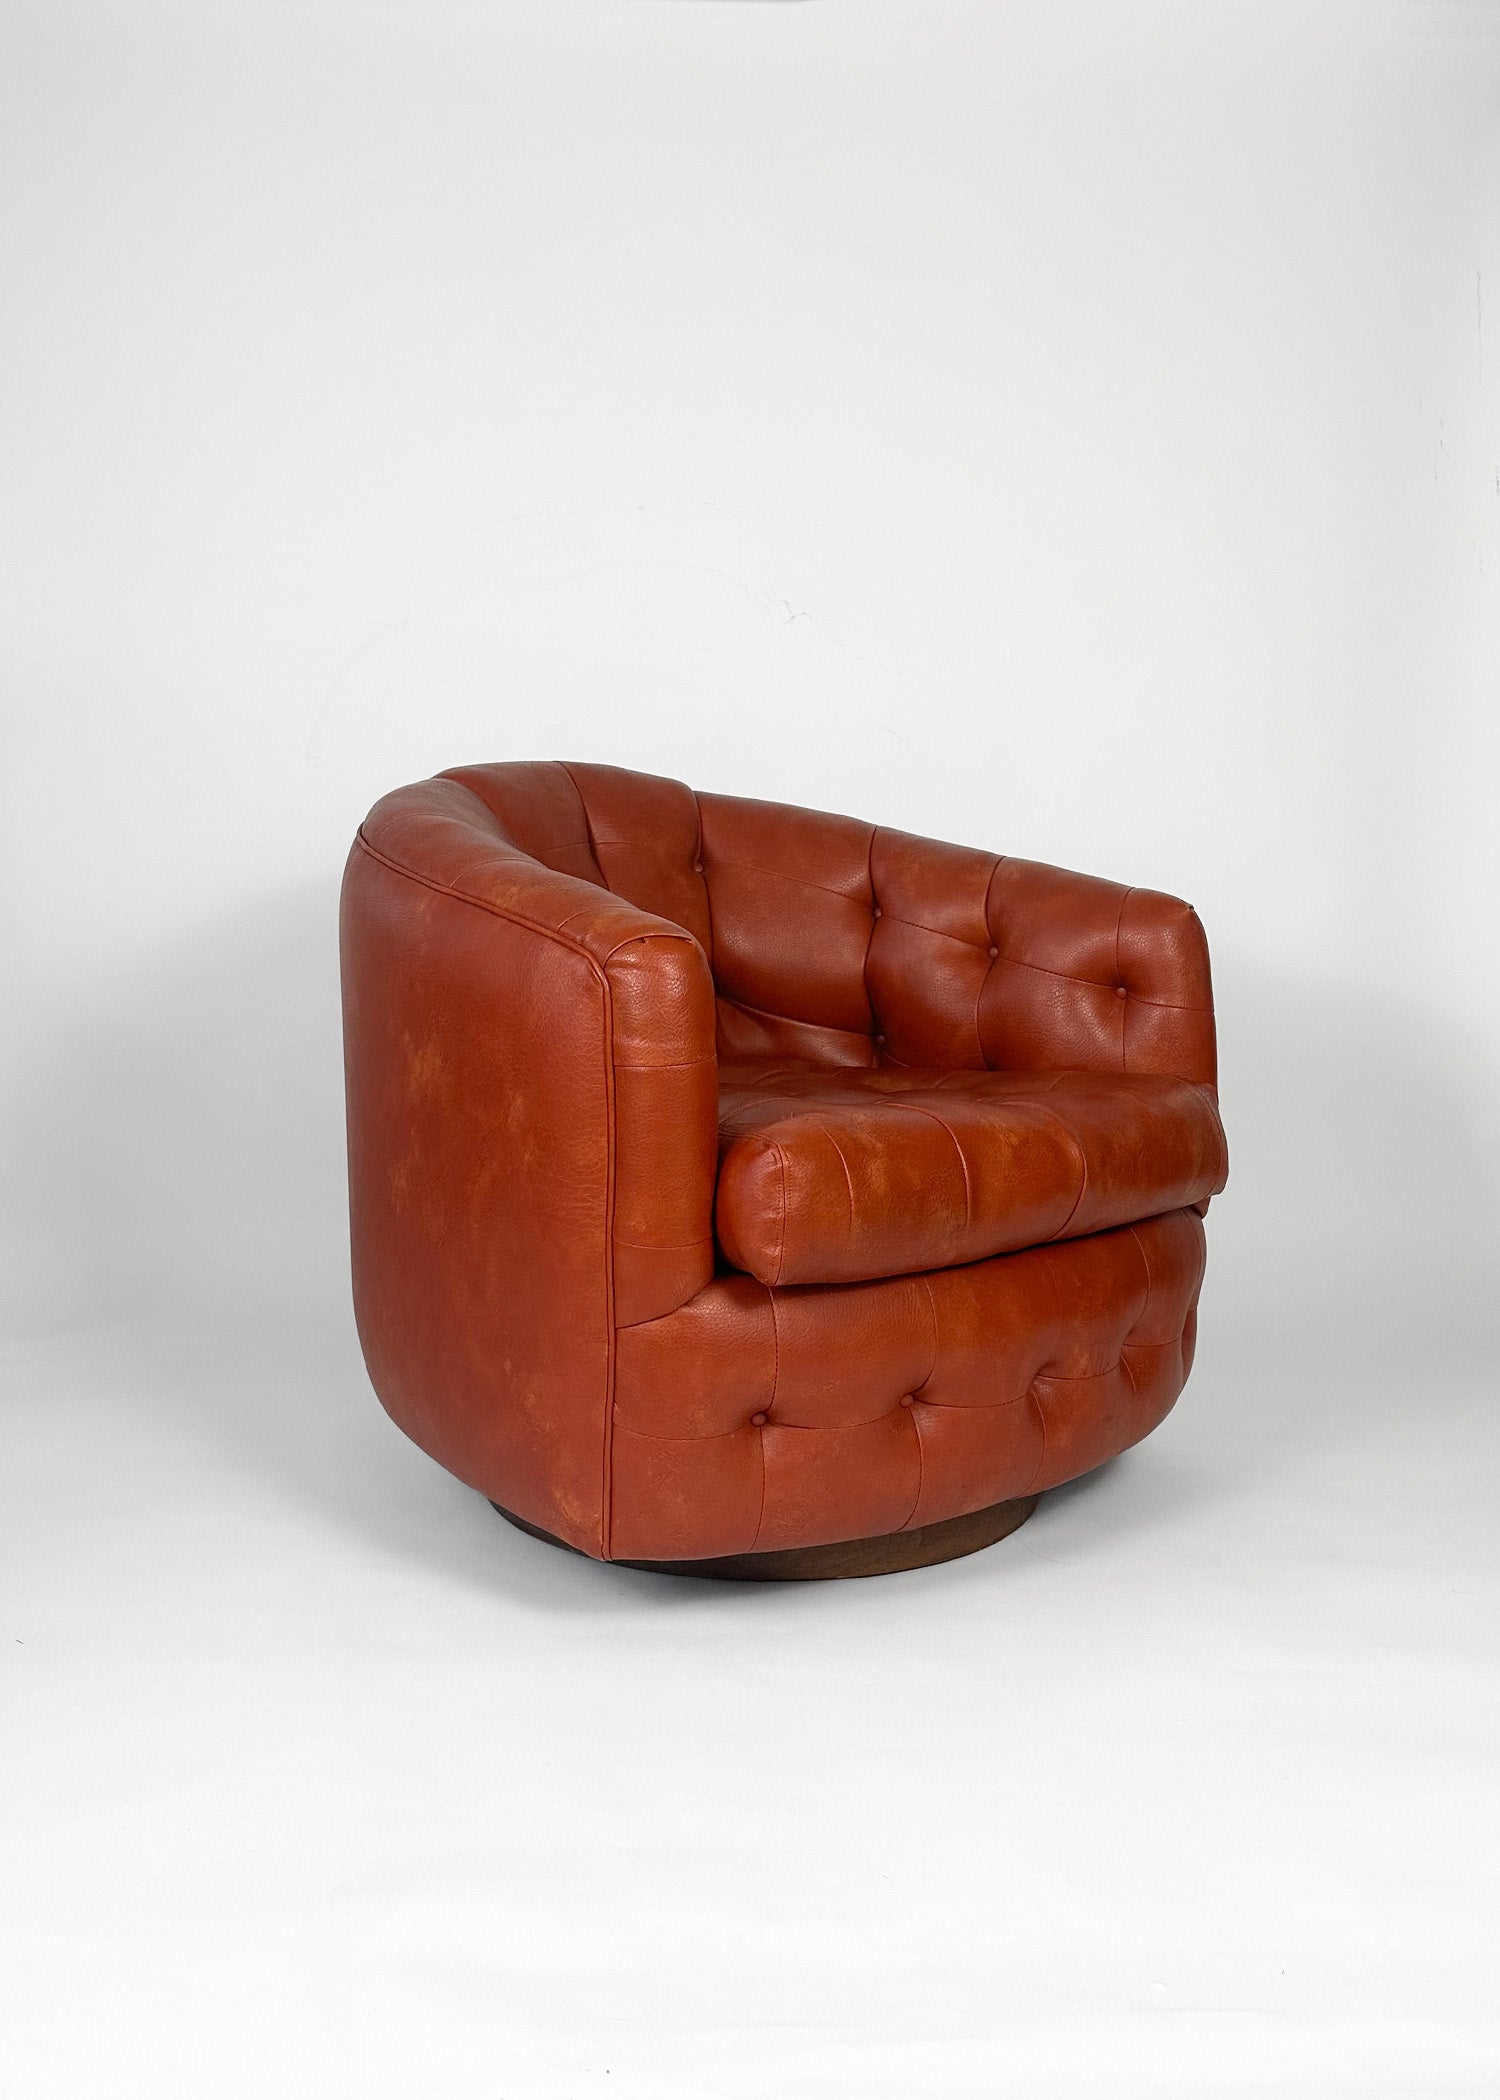 Tufted Leather Swivel Lounge Chair; Milo Baughman for Thayer Coggin